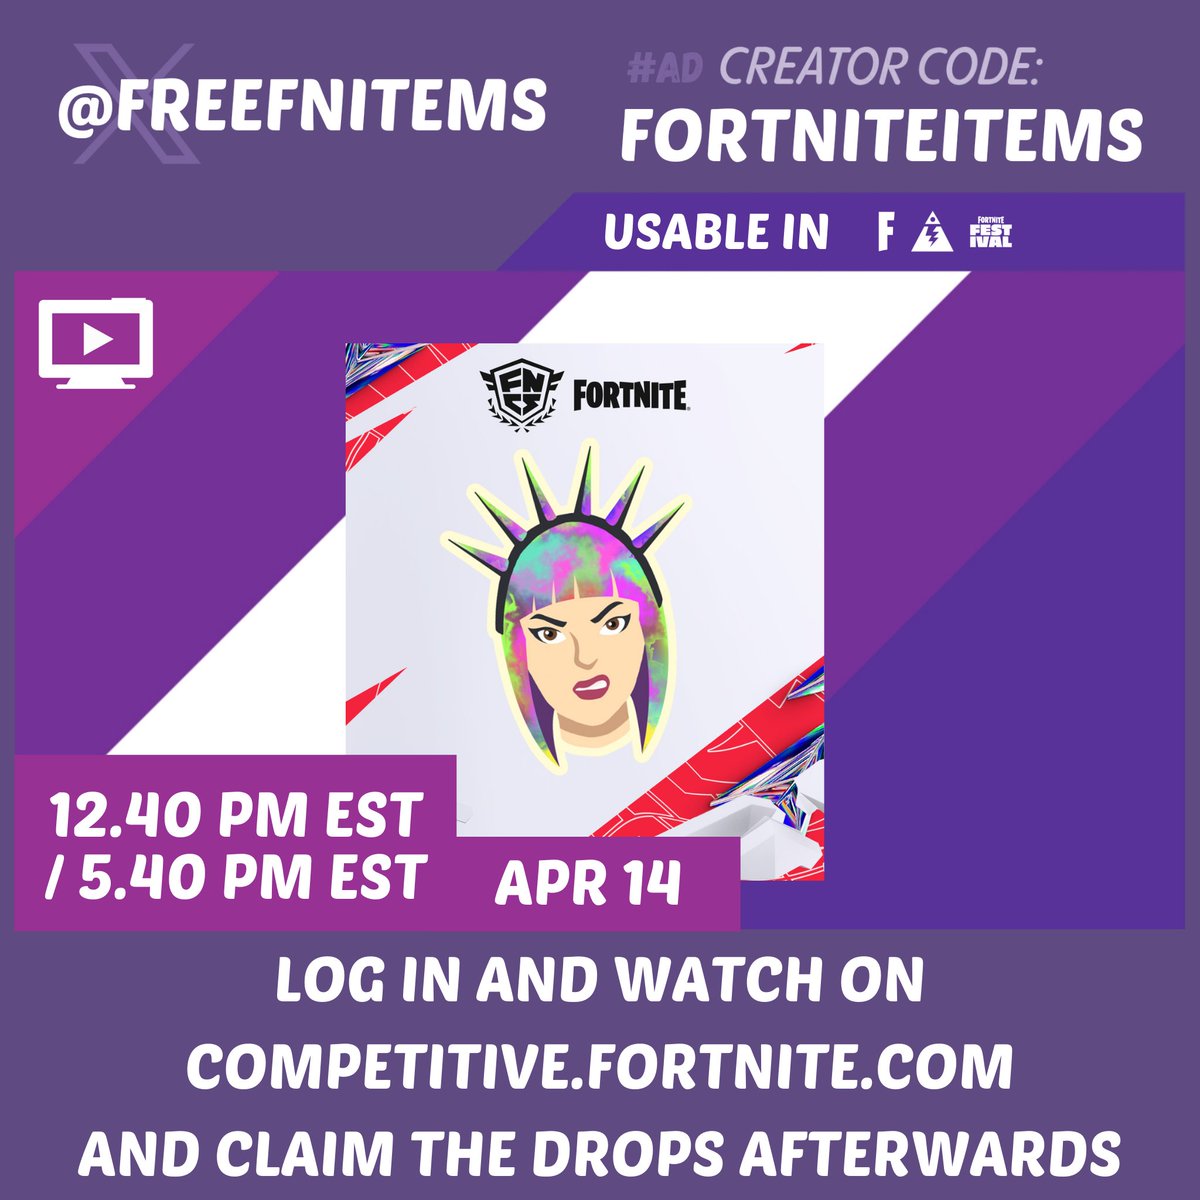 □ Emoticon 'Solo Tour' Log in and watch the stream on competitive.fortnite.com to earn the drop. Remember to claim it afterwards! (Guide in Replies) ⬇️⬇️⬇️⬇️ □ Apr 14 12.40 PM EST 5.40 PM EST #Fortnite #FortniteChapter5Season2